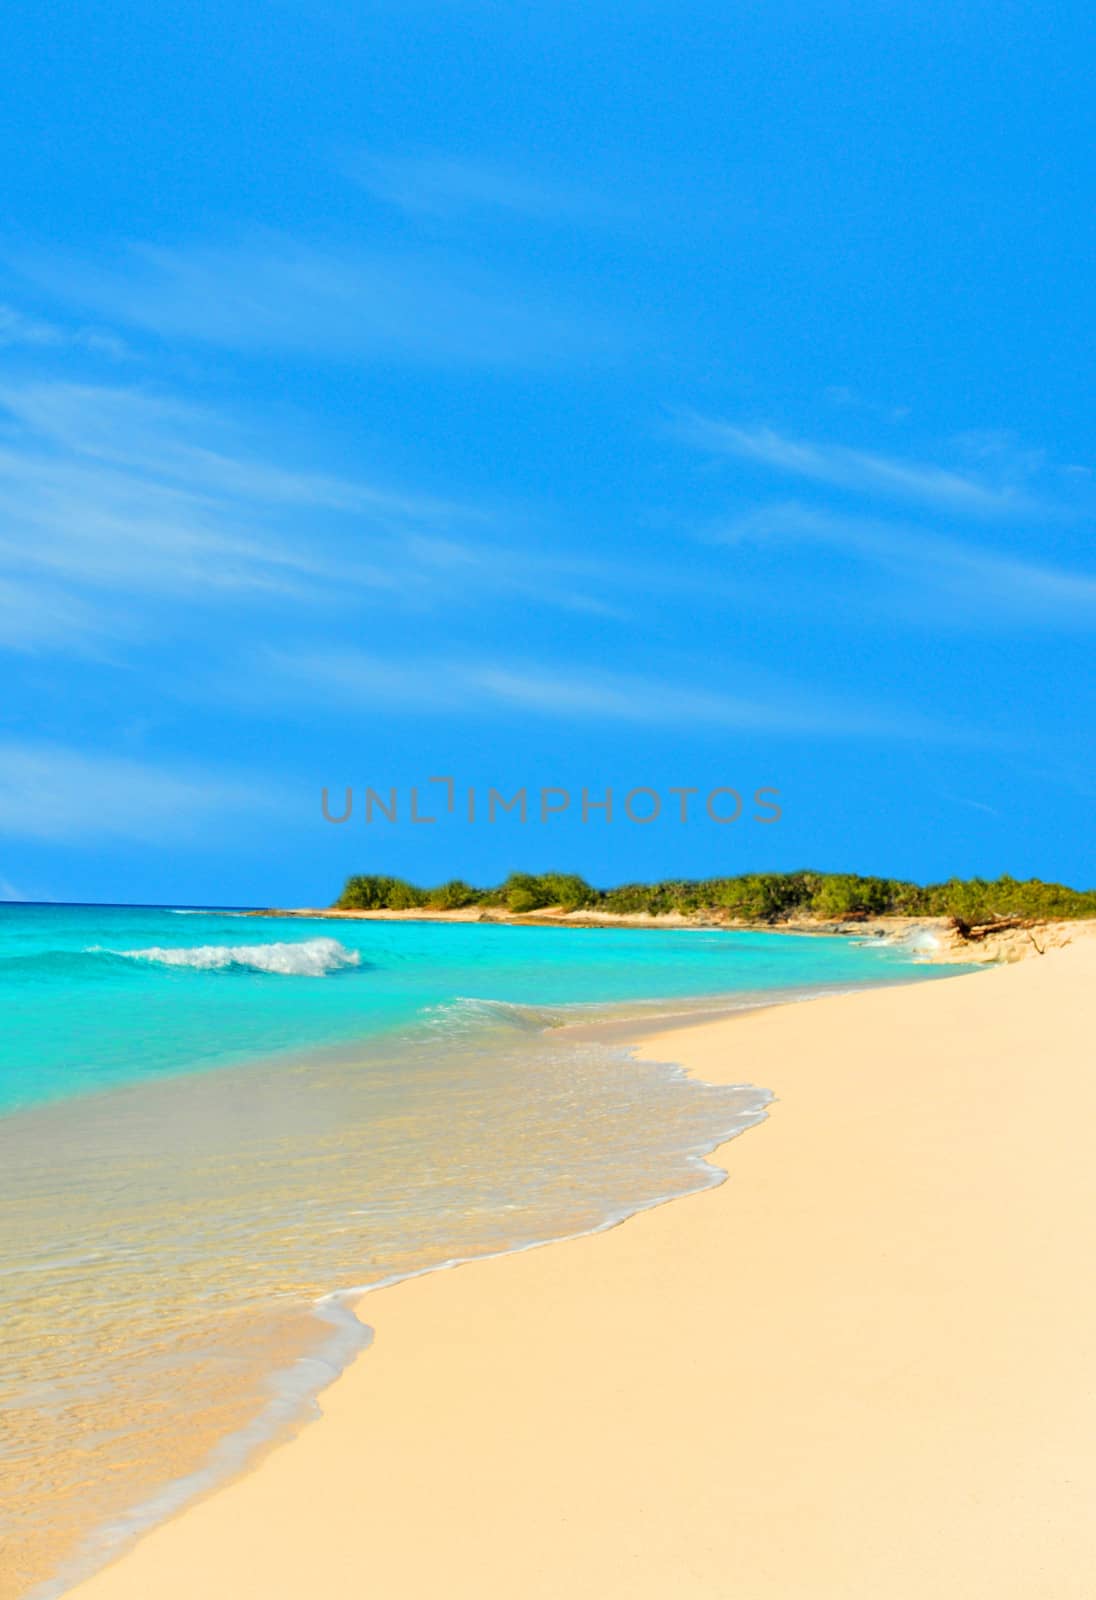 stunning tropical beach landscape with turquoise water and white sand with nobody